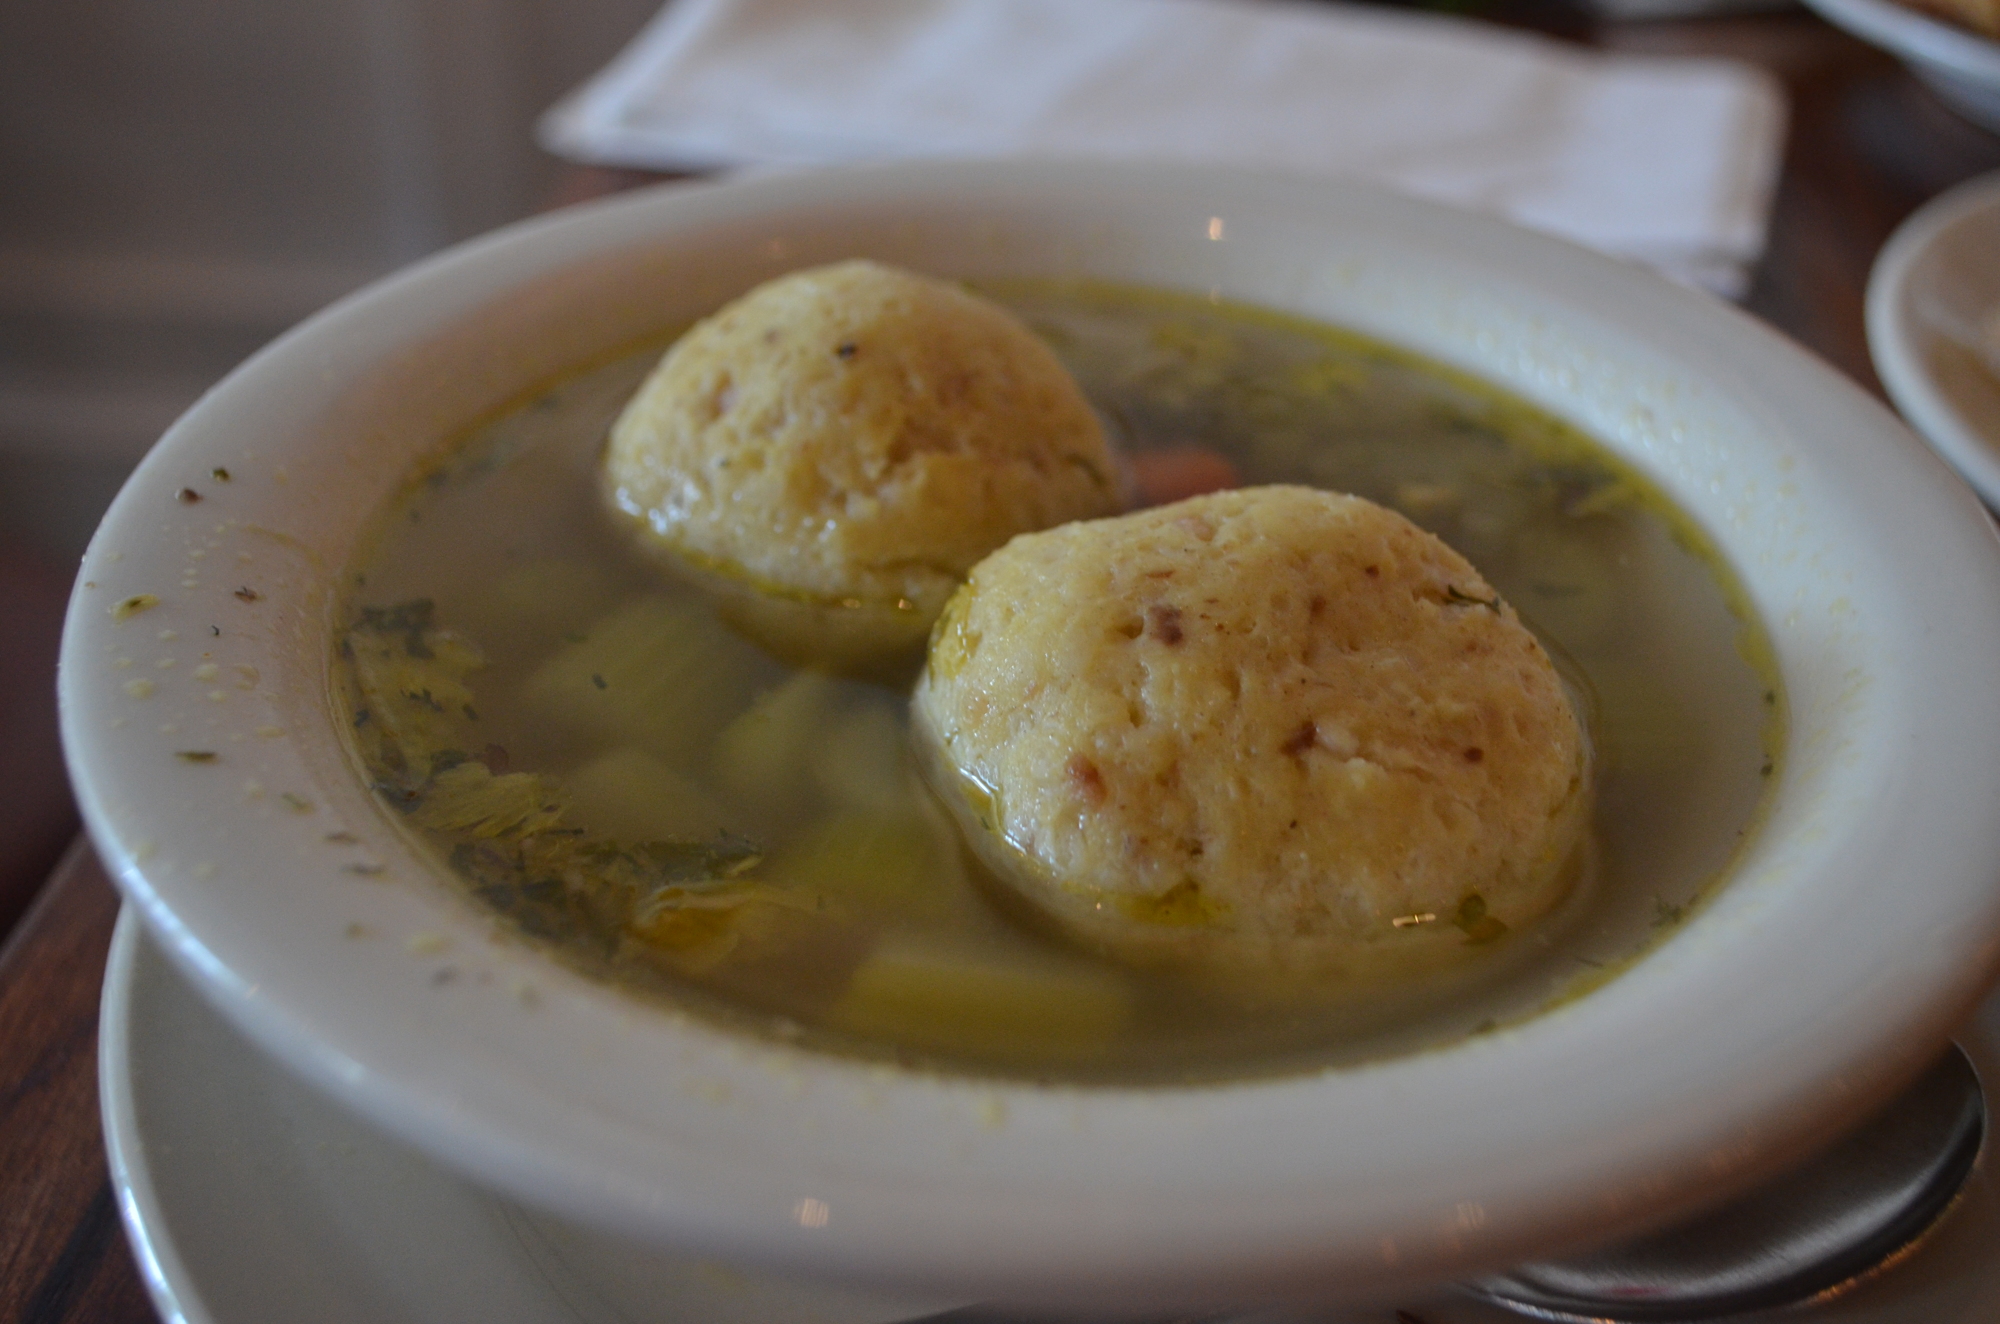 Matzo Ball Soup: A classic comfort food, matzo balls are served in a noodle soup and the balls themselves are a light mixture of matzah meal (unleavened bread), eggs, water and chicken fat.